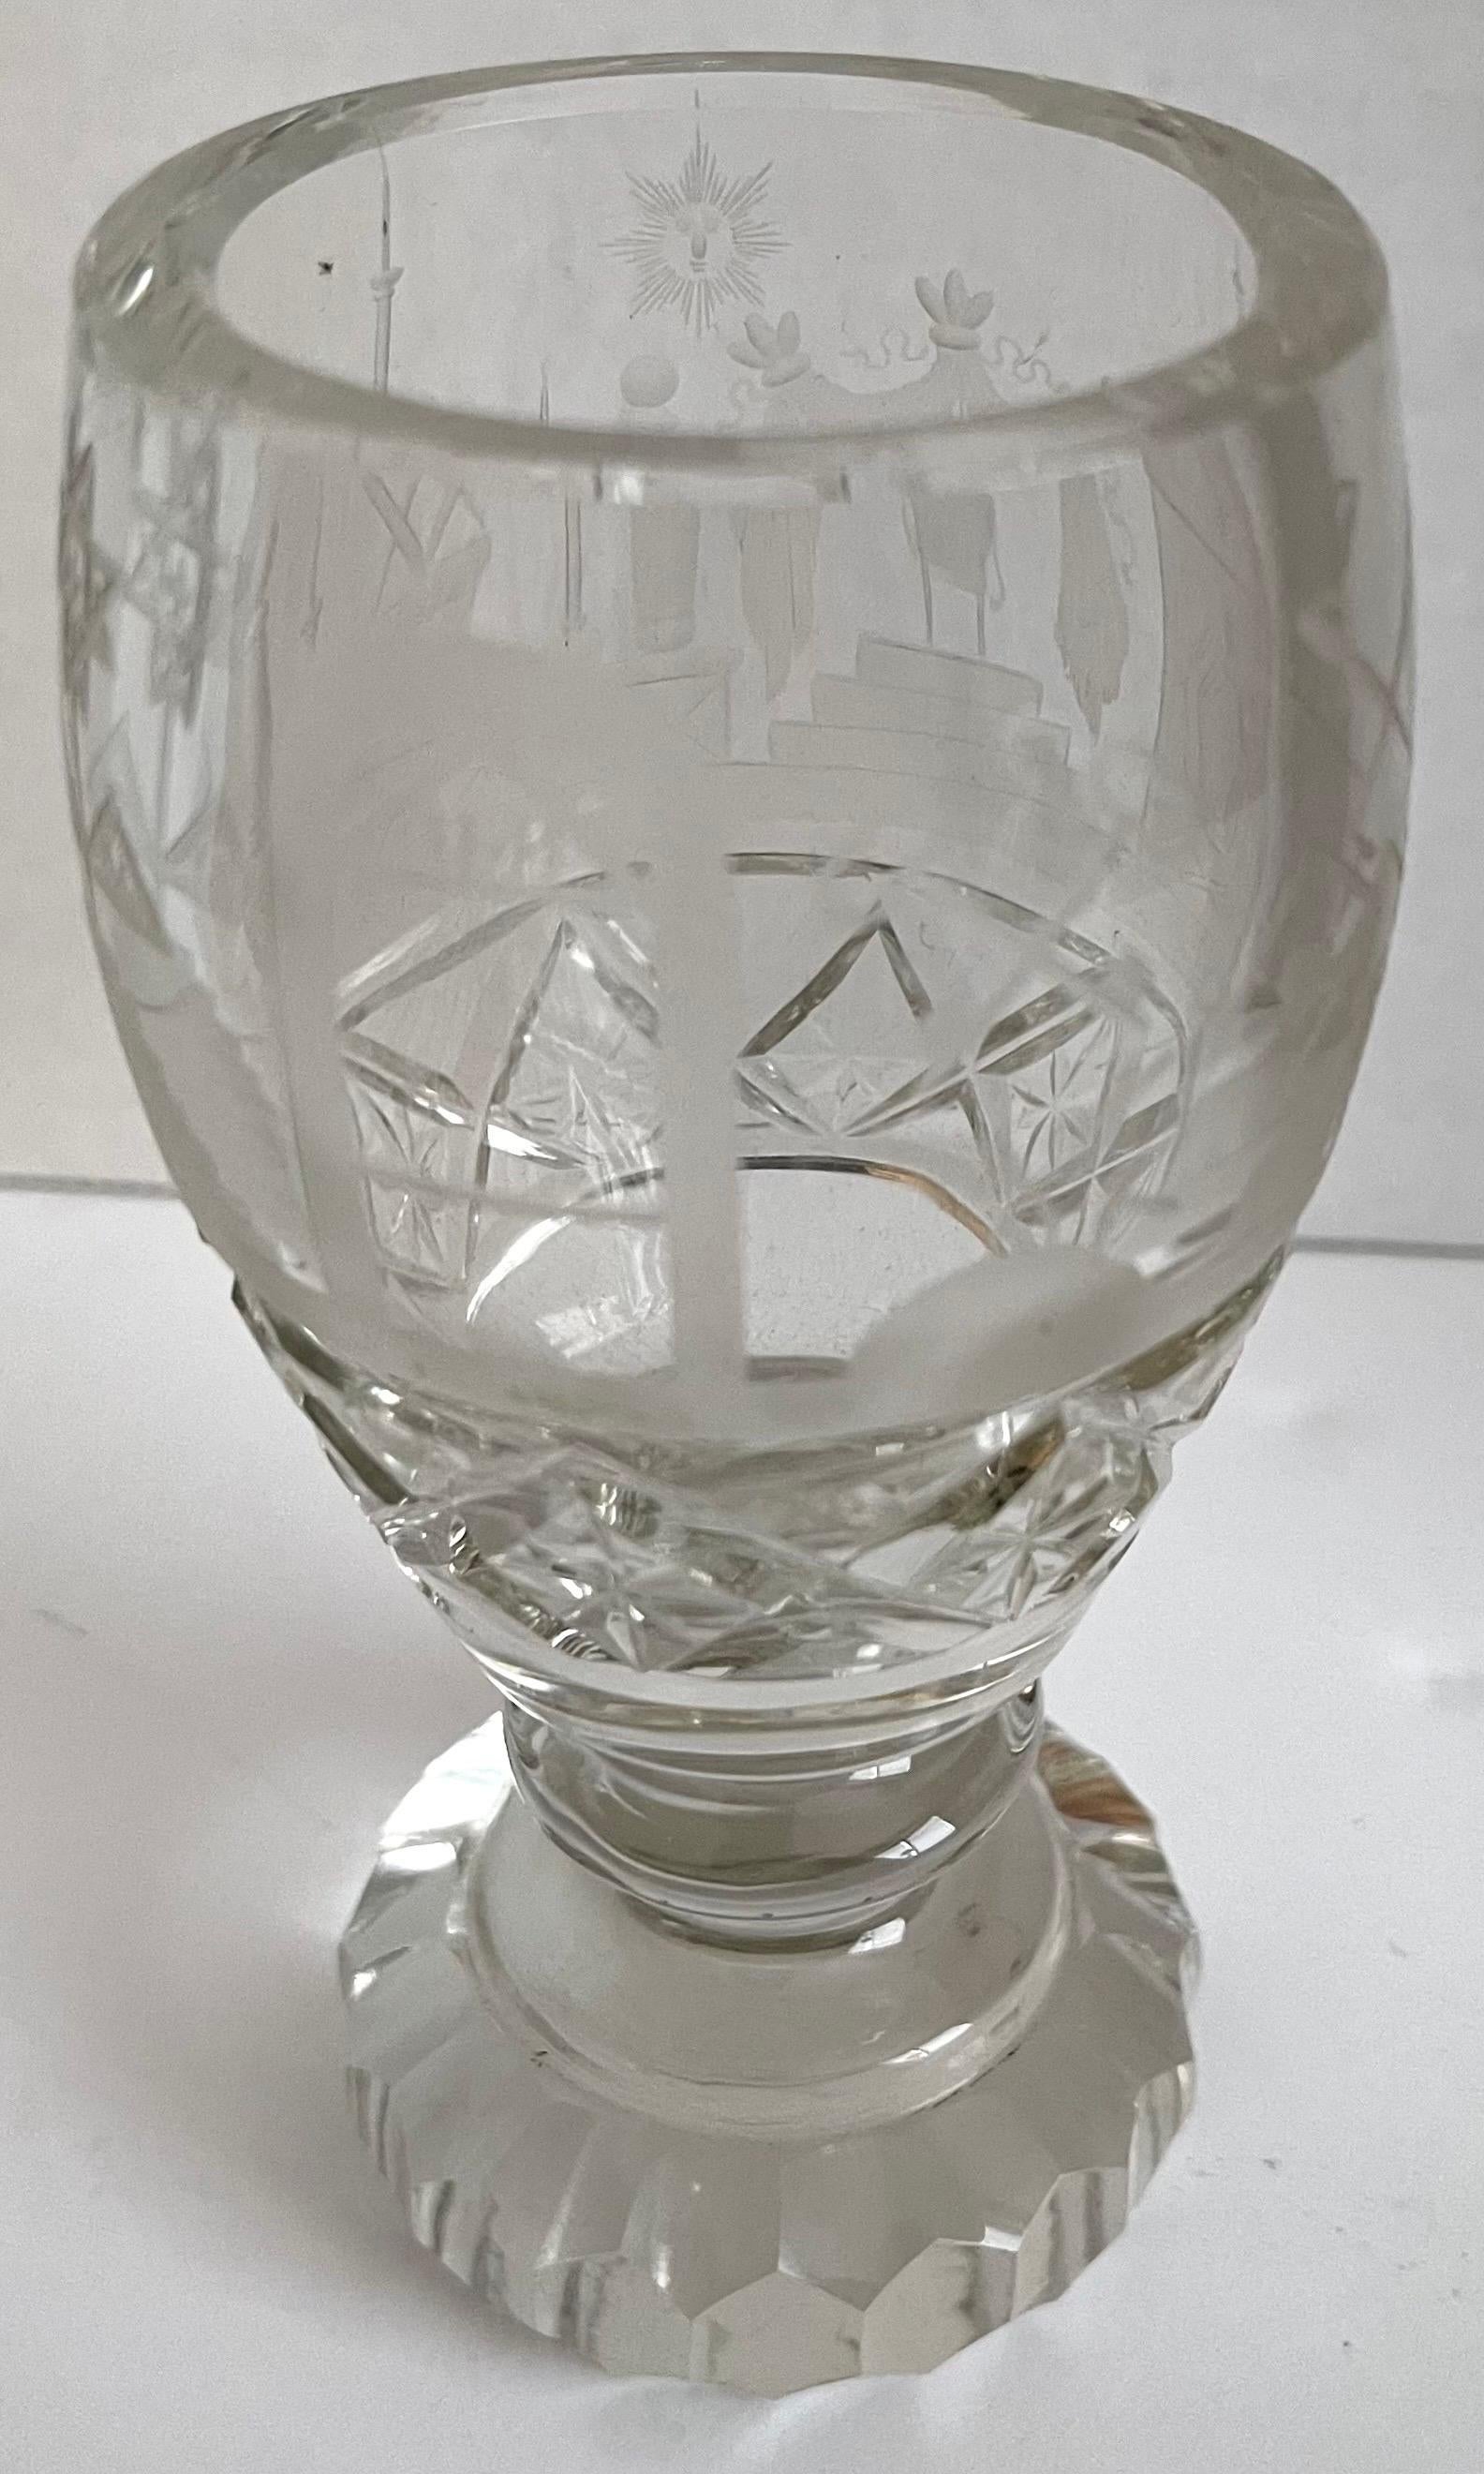 Antique American Masonic cut crystal ceremonial cup. Heavy cut crystal with etched/ frosted Masonic motif. No makers mark or signature. 